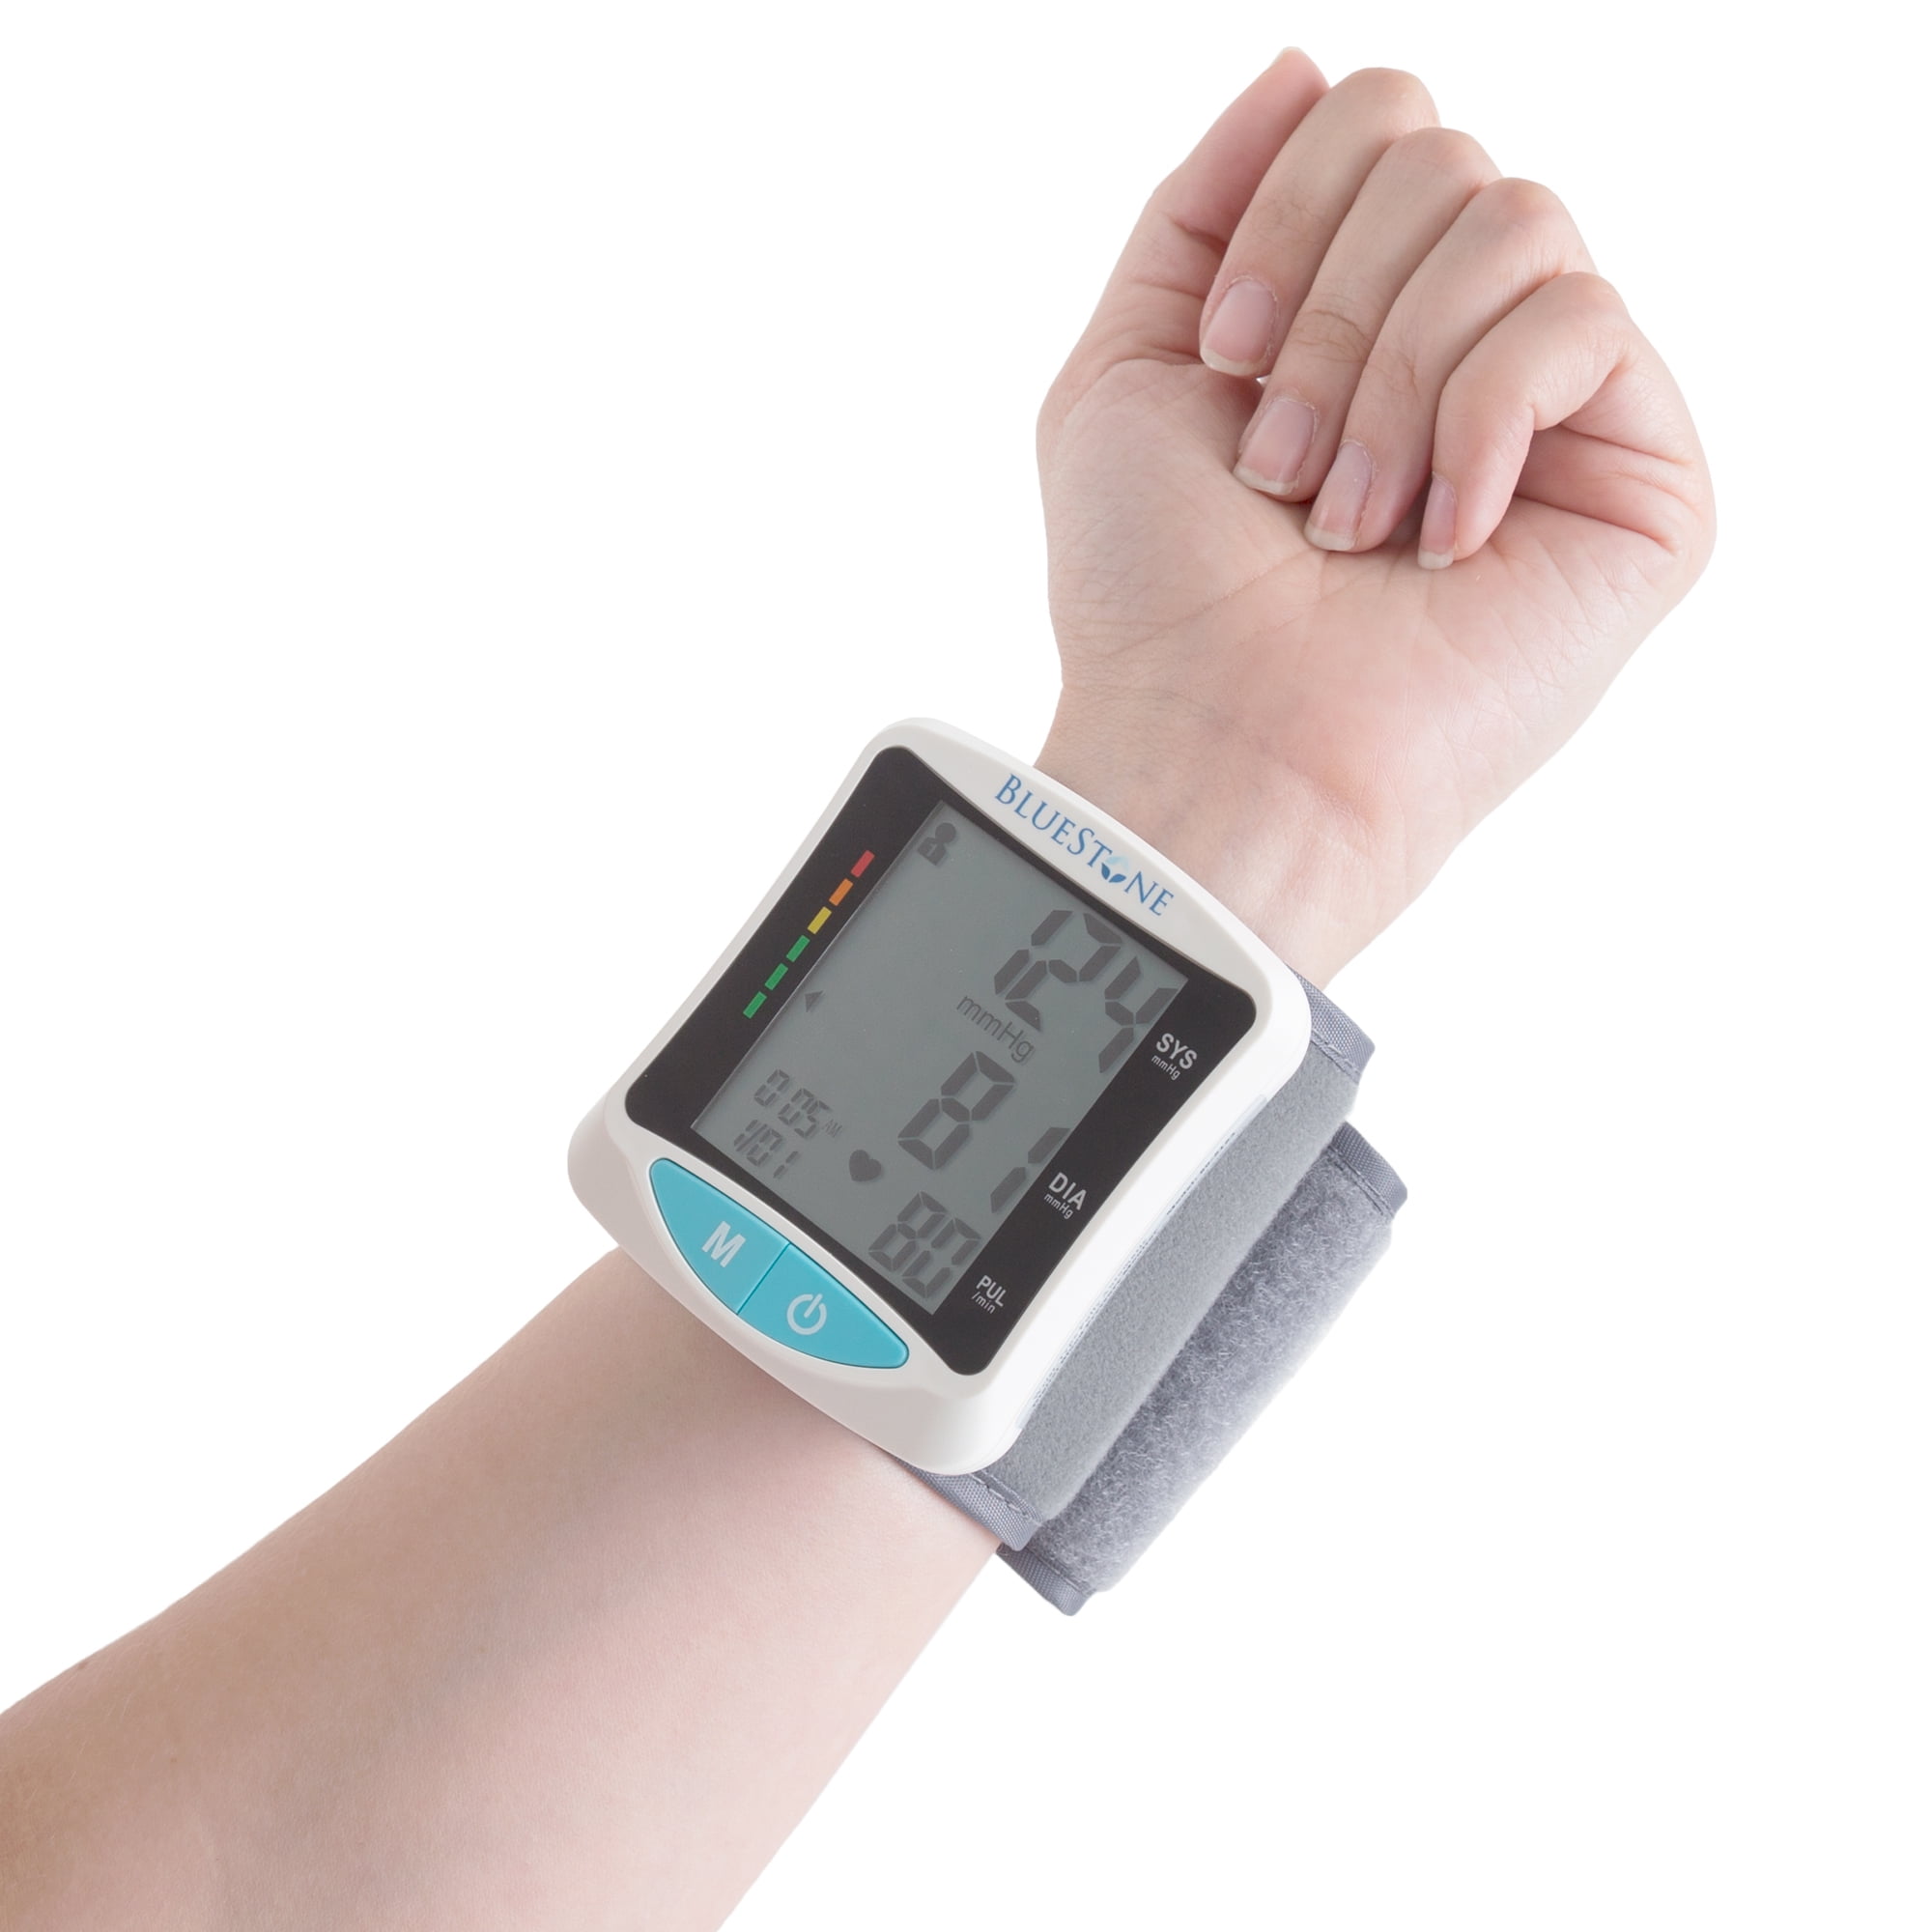  HoMedics Upper Arm Blood Pressure Monitor, Automatic BP Monitor  with Easy One-Touch Operation, Stores up to 180 Readings (90 Per User),  Includes One Blood Pressure Cuff and 4 AAA 1.5v Batteries 